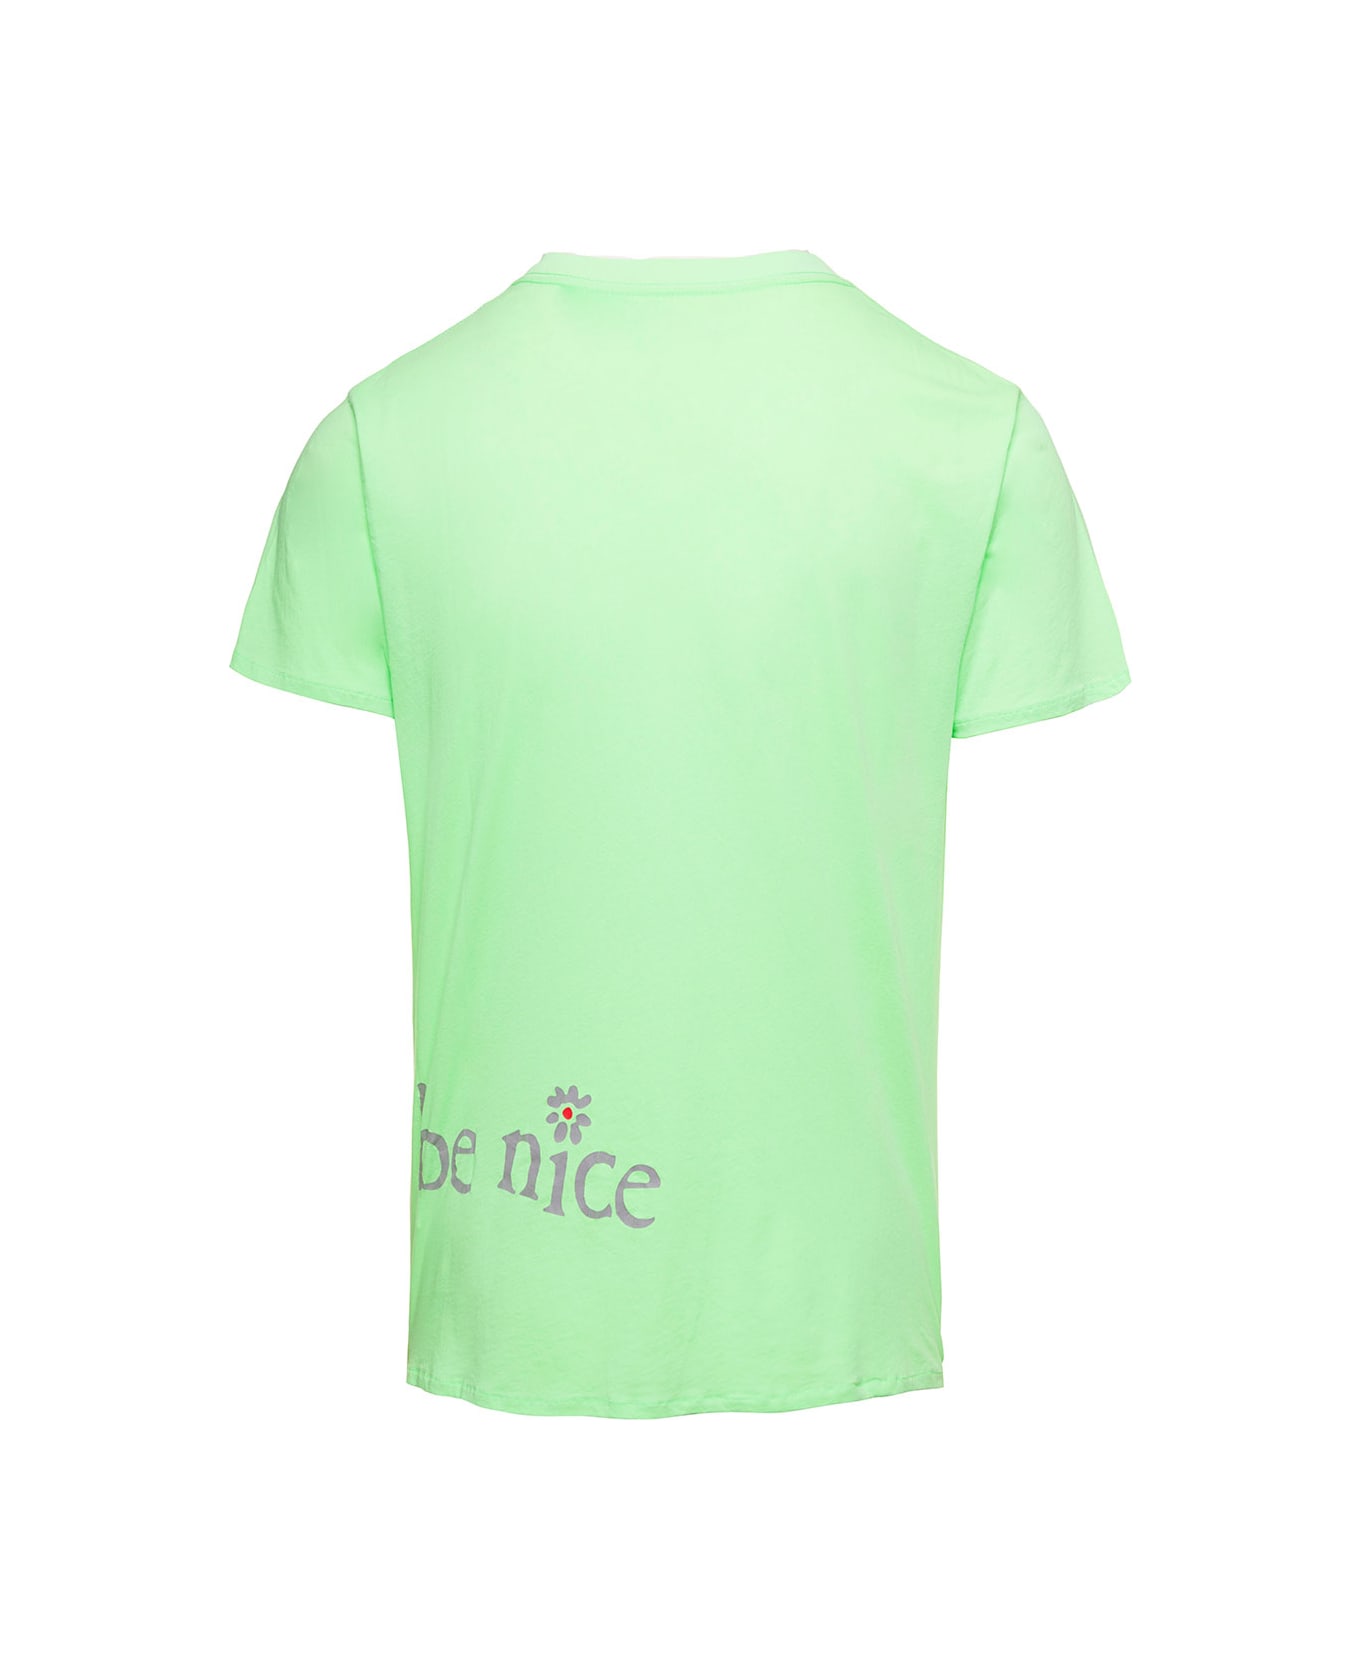 ERL Green Crewneck T-shirt With Venice Print In Cotton - Green シャツ